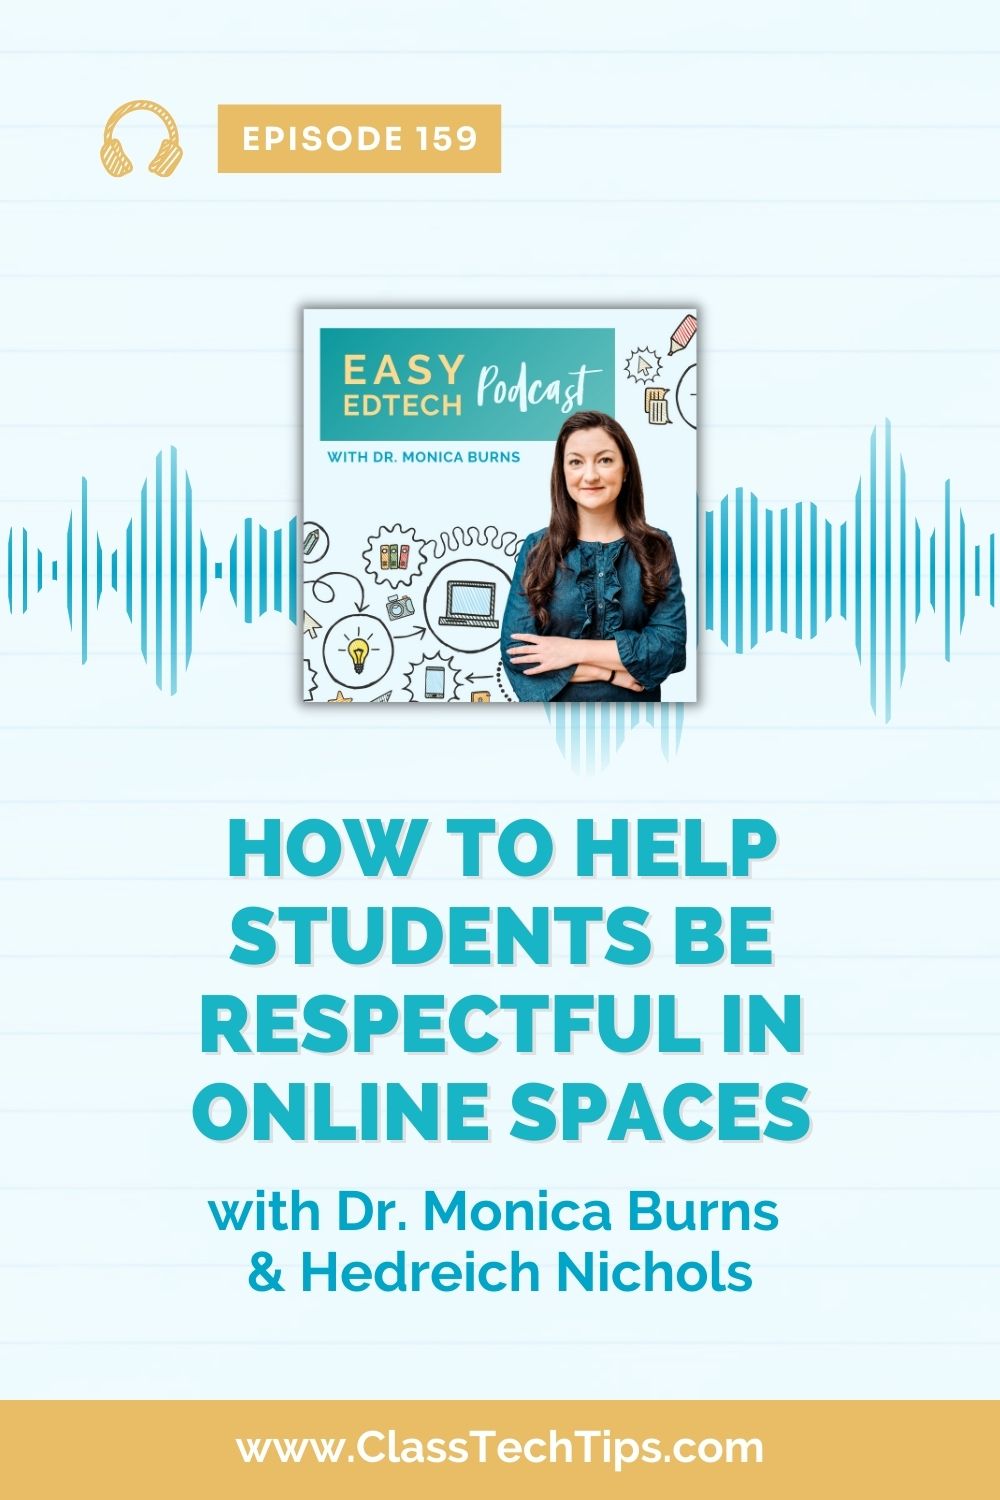 Author and EdTech Curriculum Instructional Specialist, Hedreich Nichols discusses how educators can help students be respectful online.